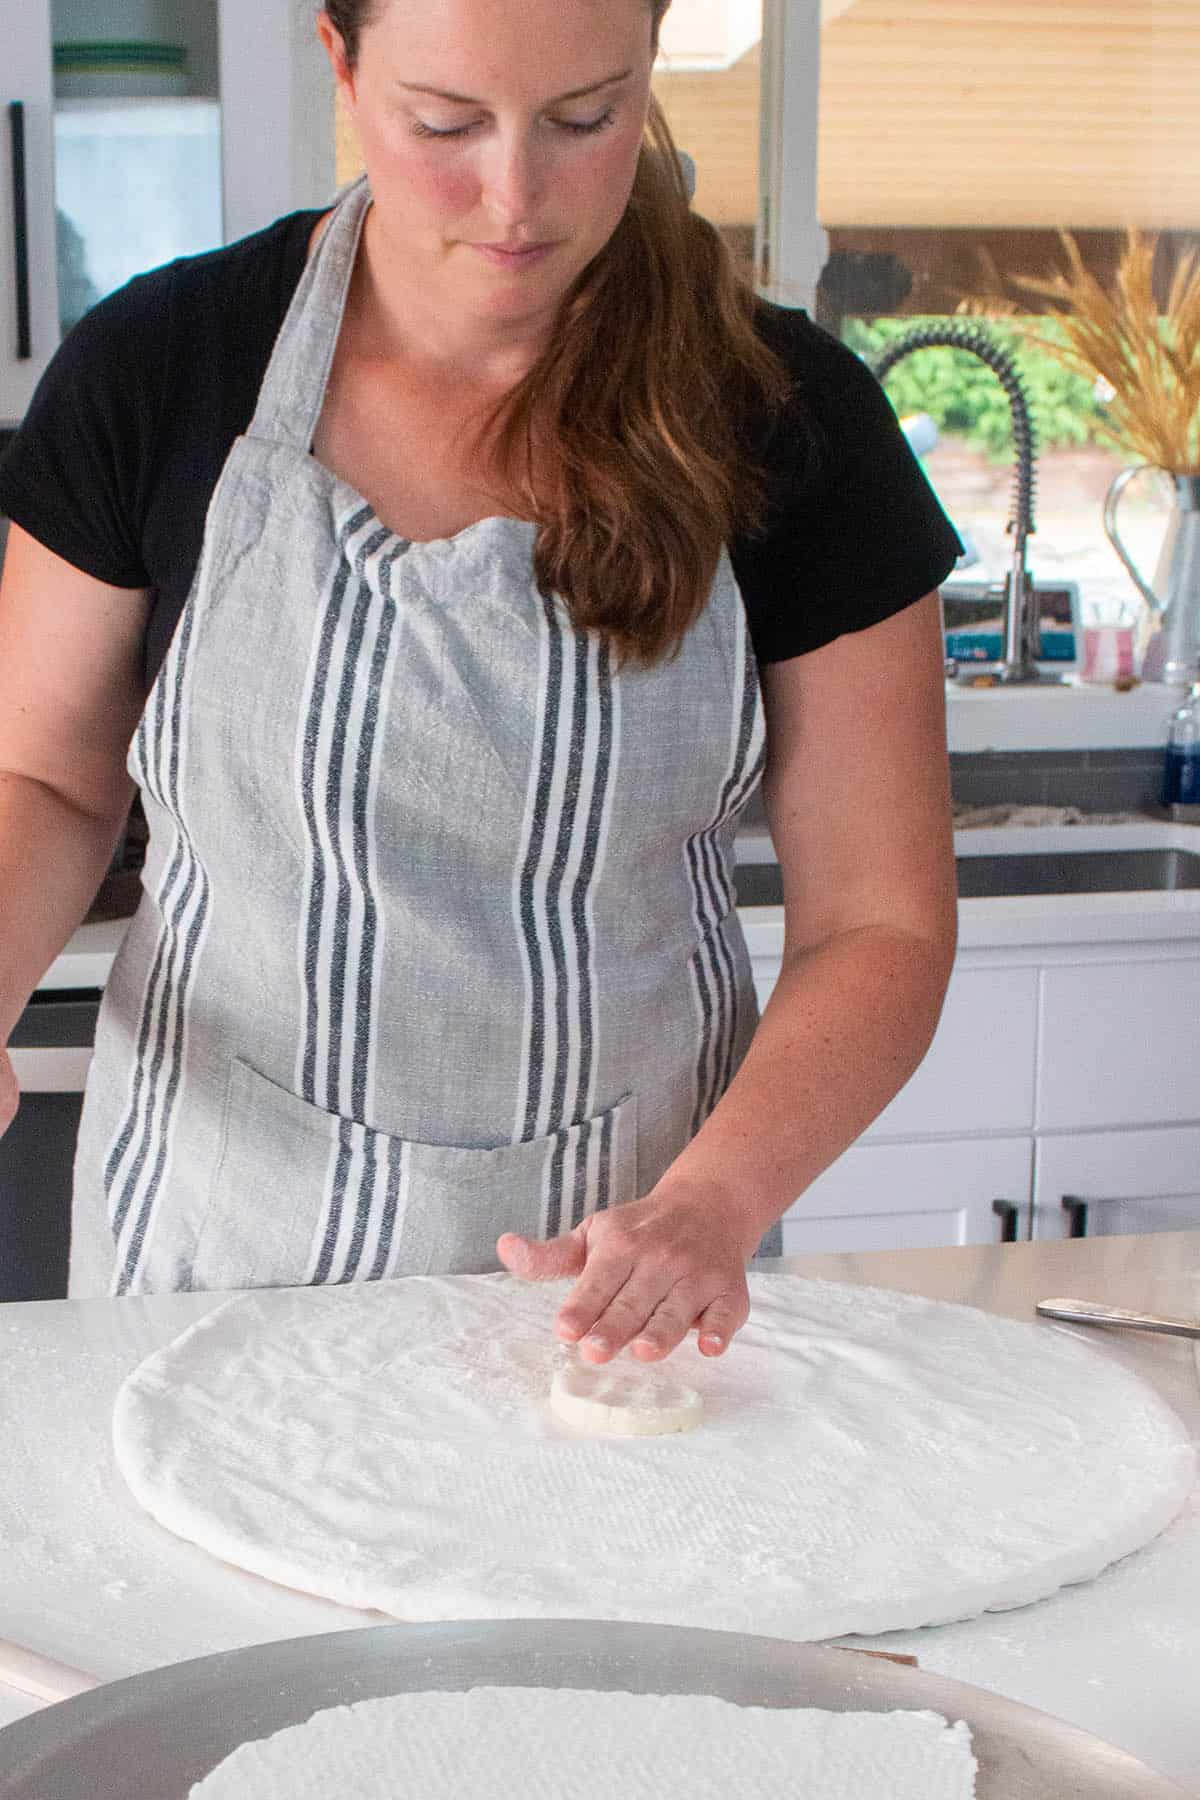 A baker with a piece of lefse dough rolling it in flour.